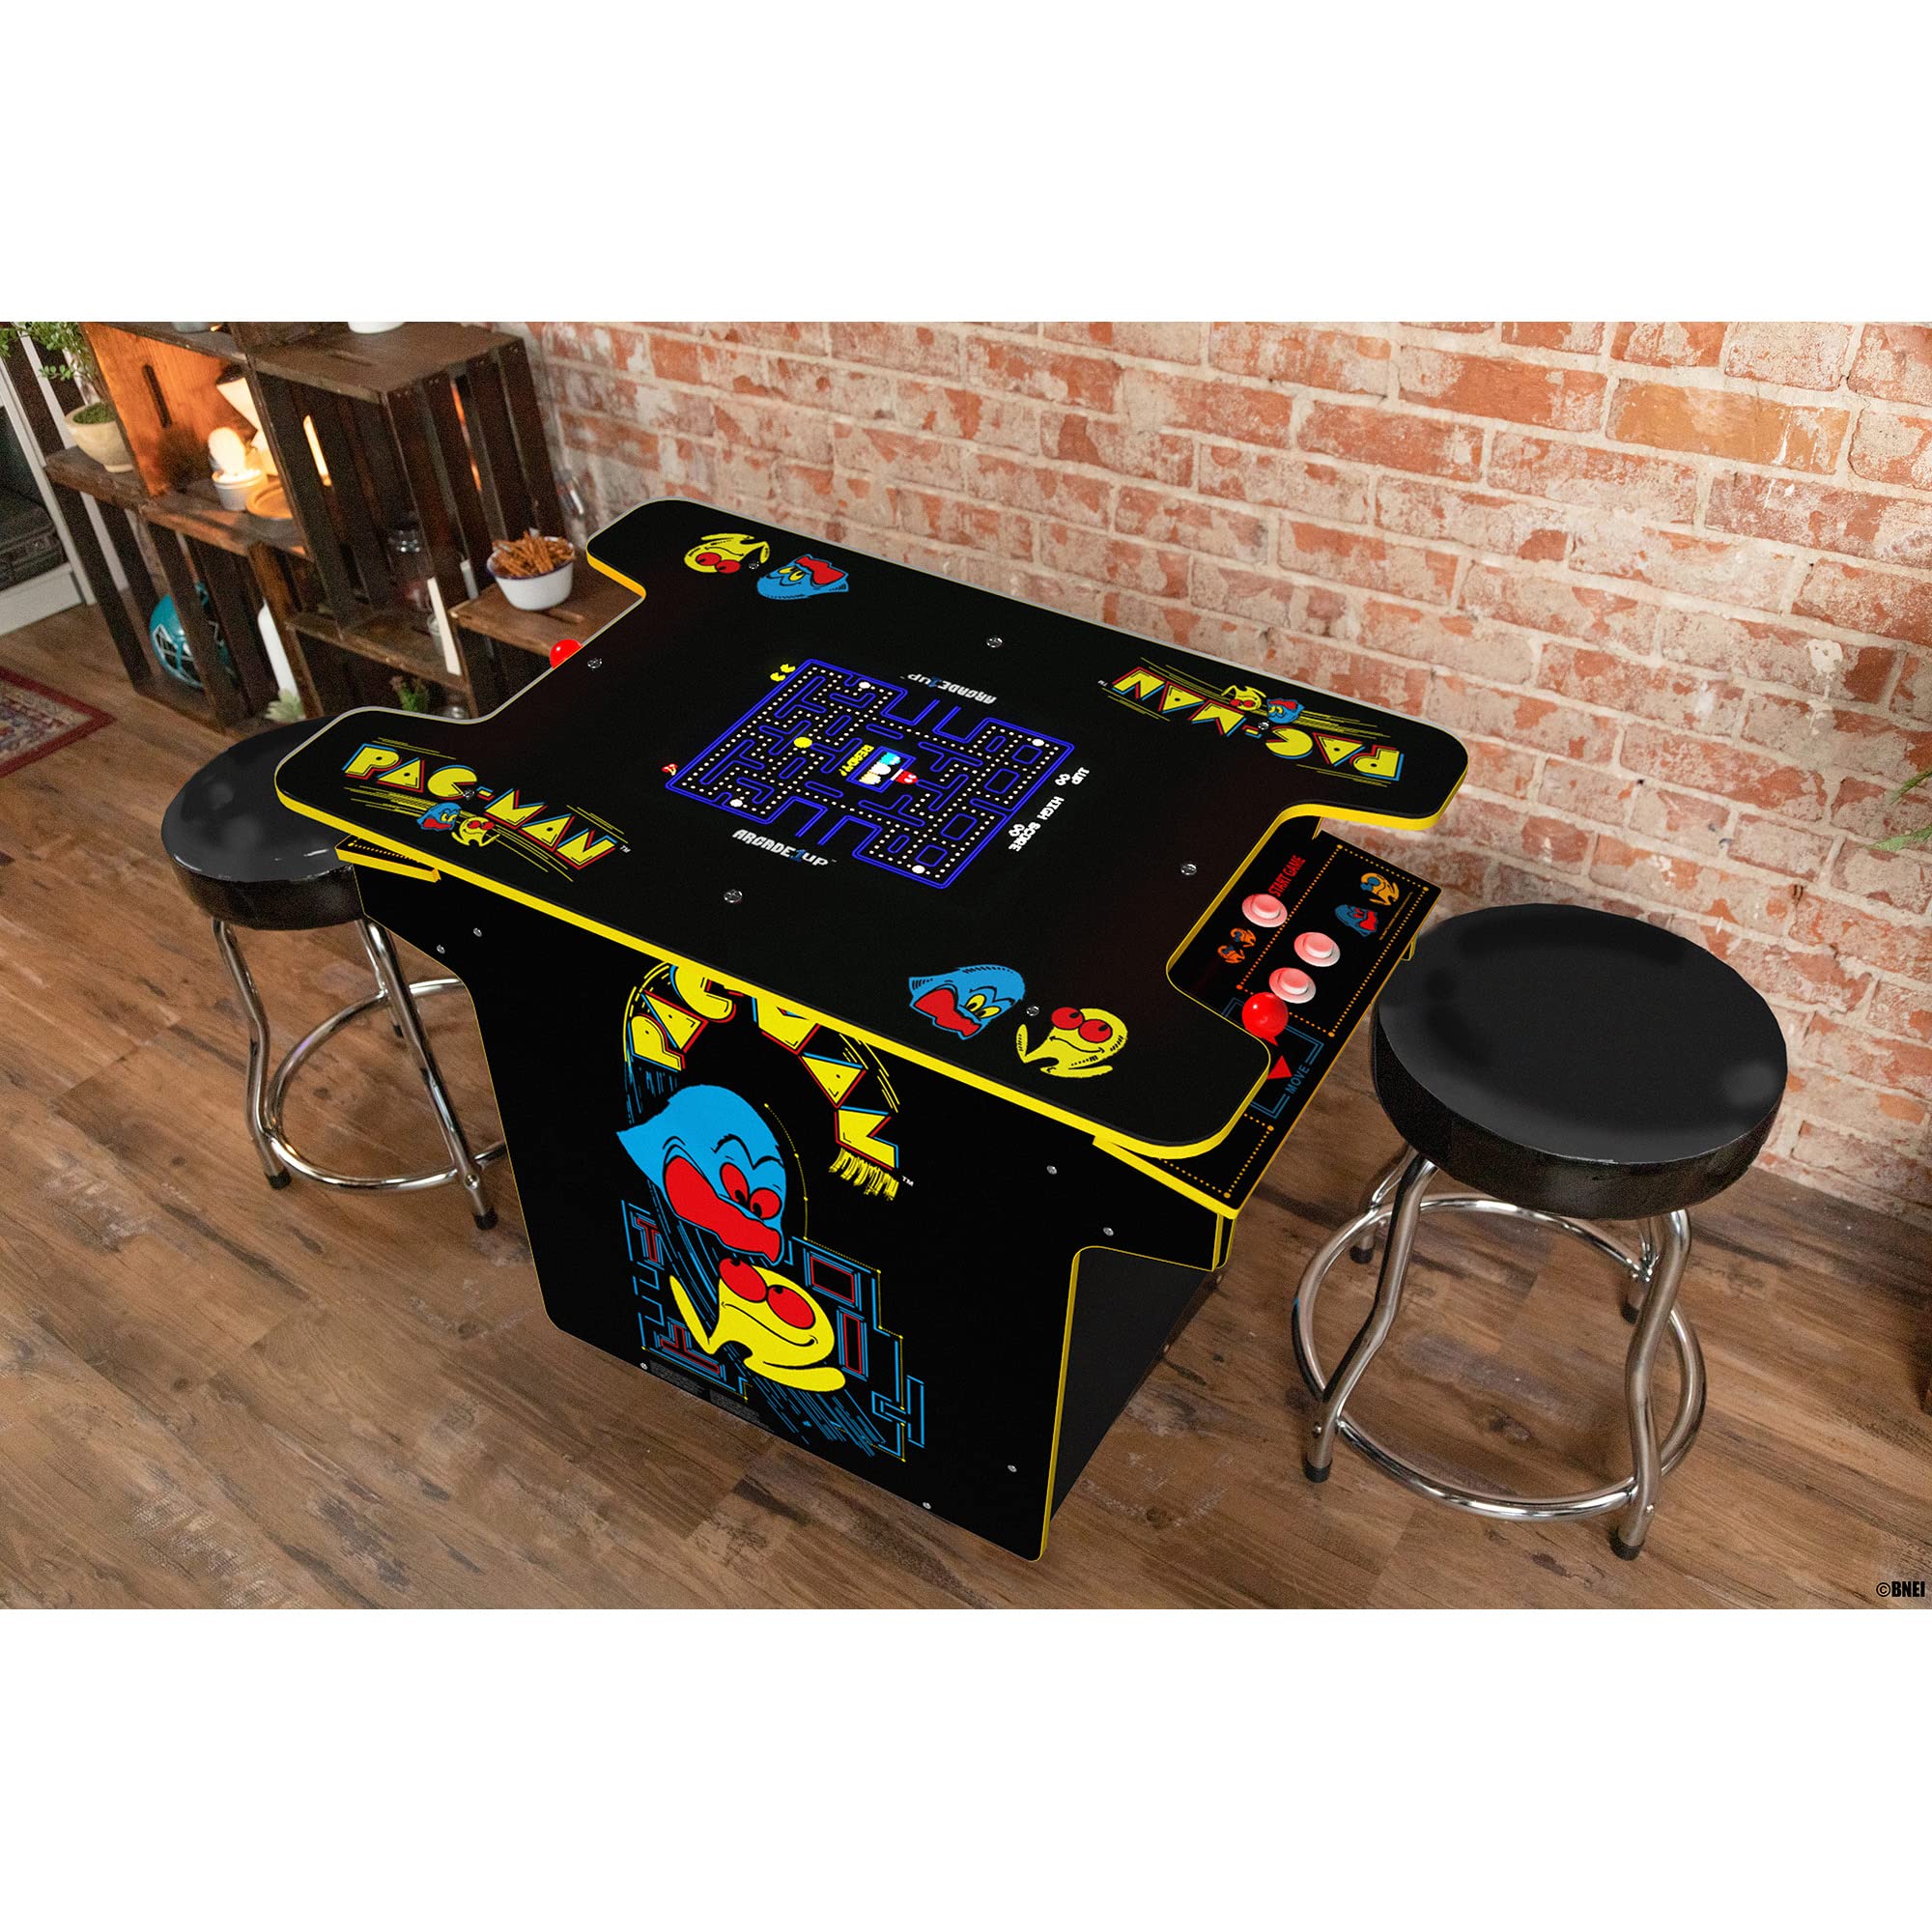 Arcade 1Up Arcade1Up PAC-MAN Head-to-Head Arcade Table - Black Series Edition - Electronic Games;